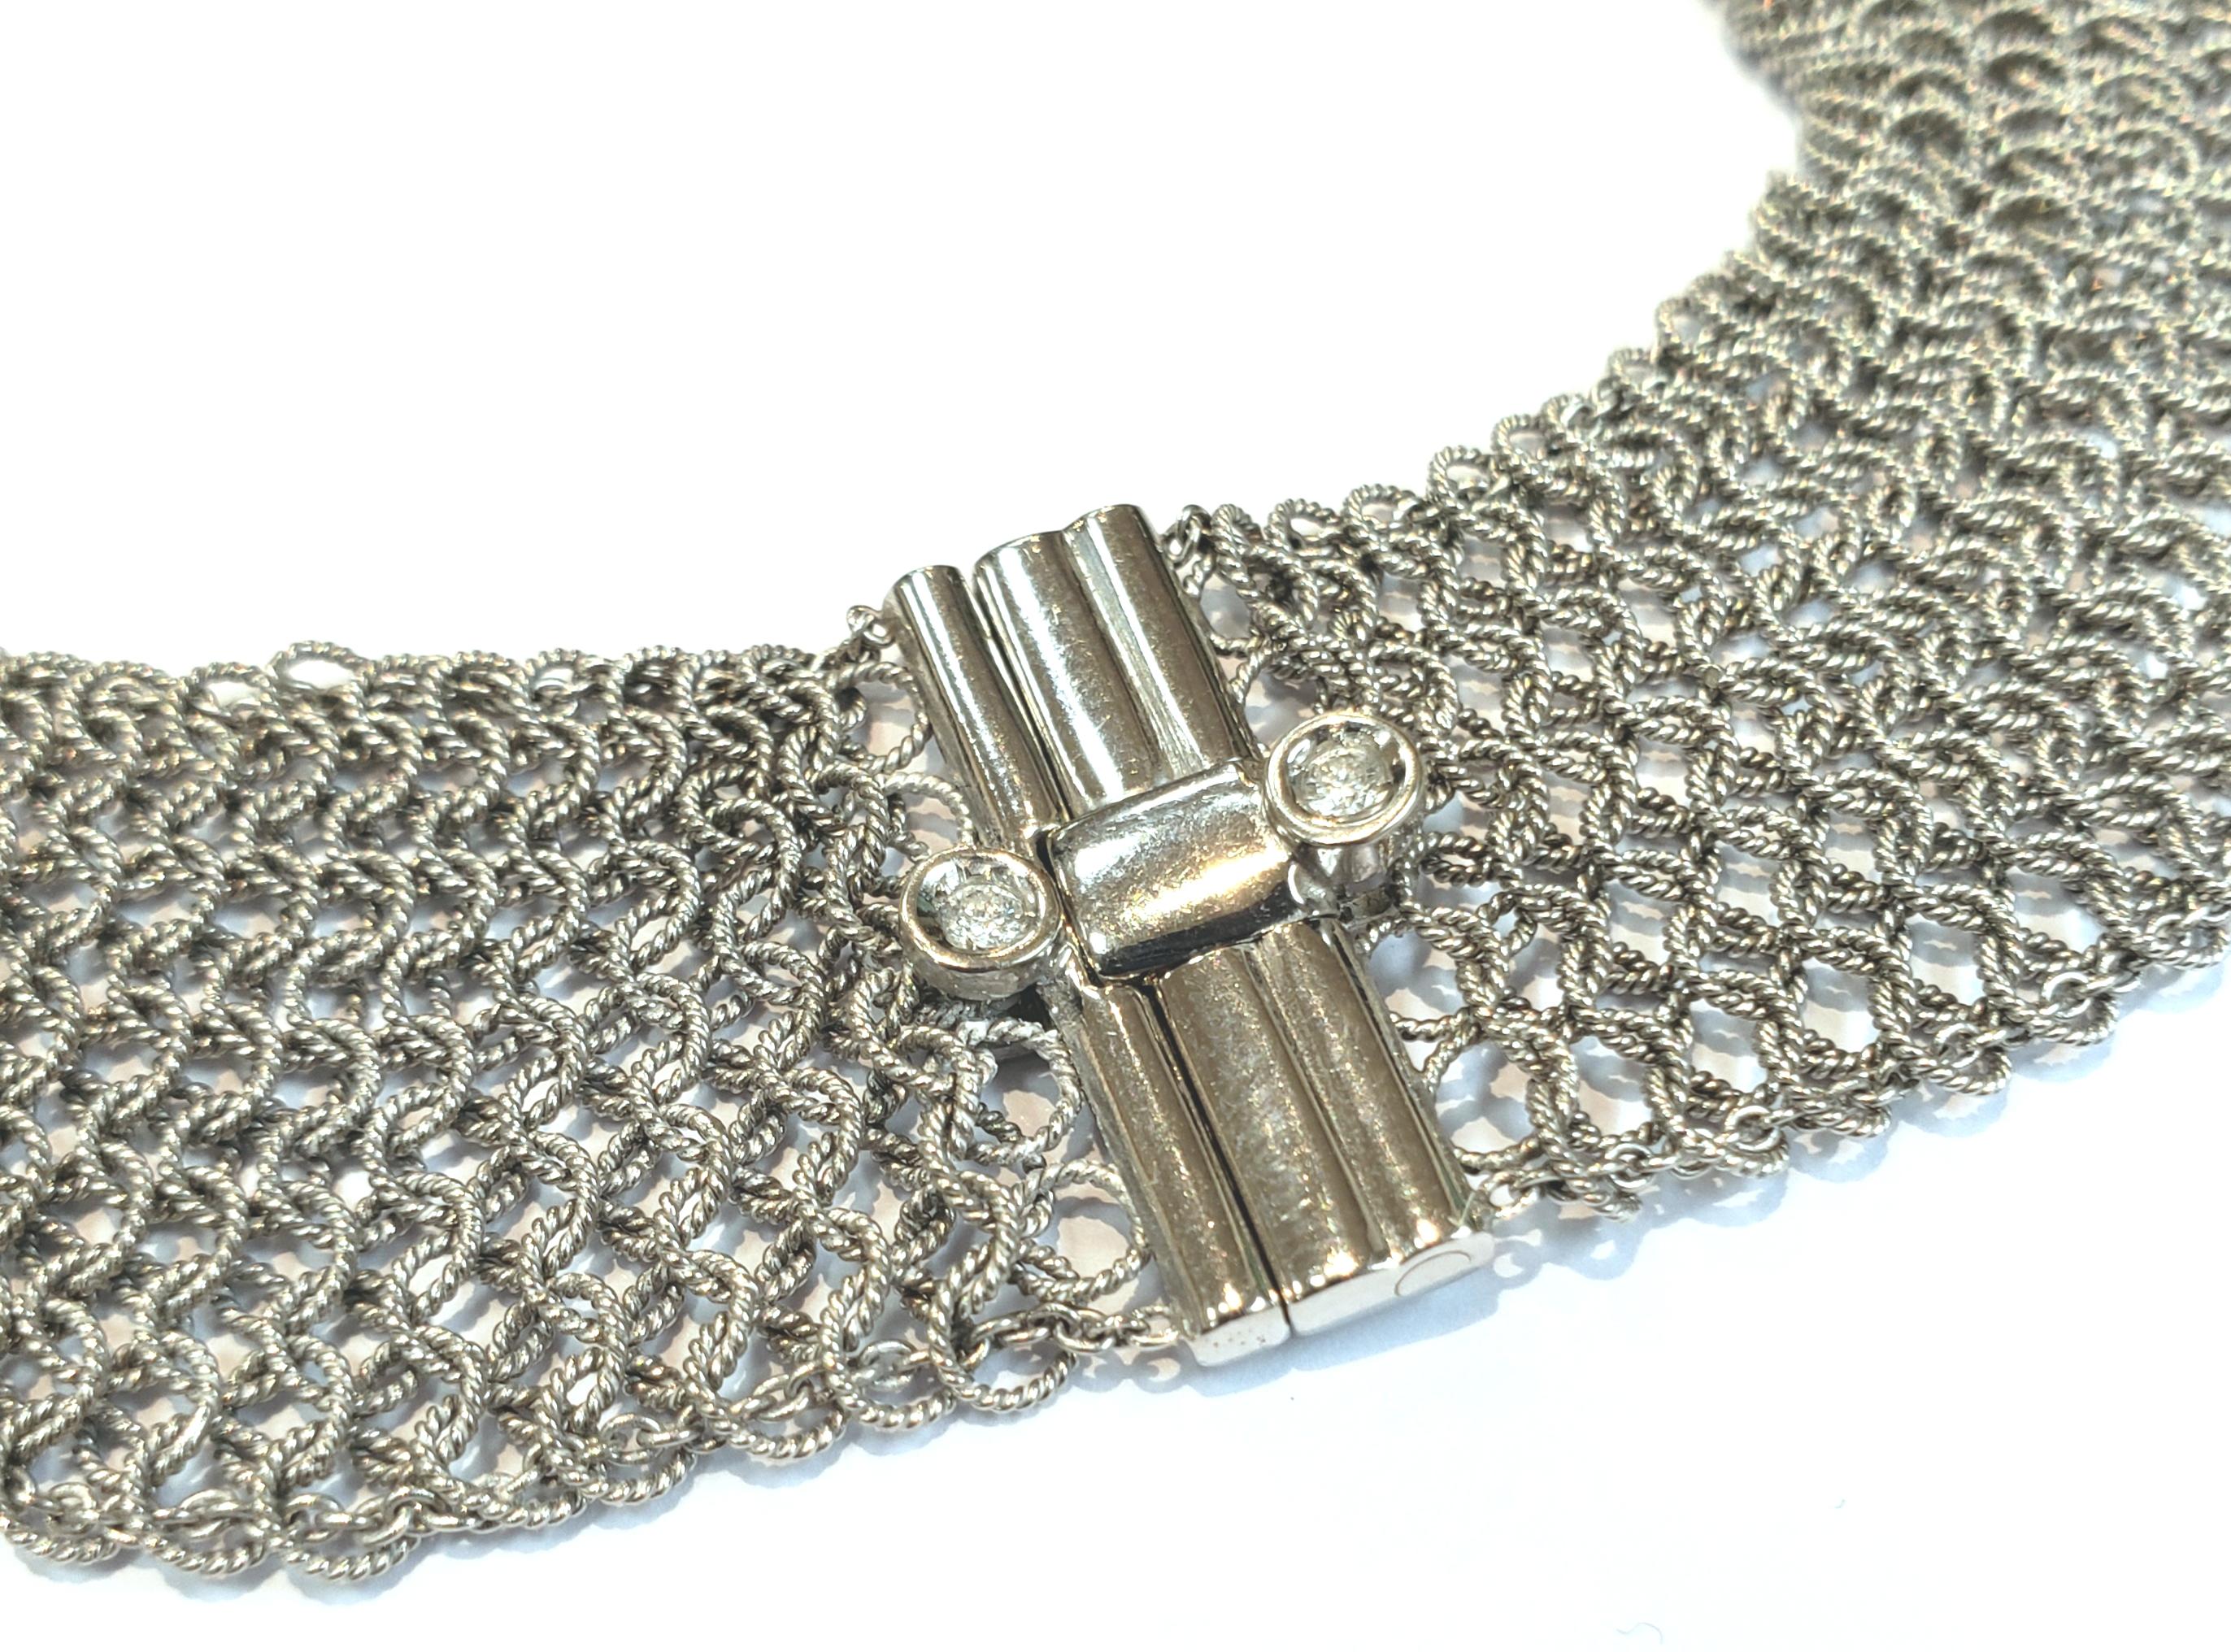 18 karat white gold, one inch wide, flexible, textured mesh choker with 22 bezel set diamonds. The textured finish gives the piece a soft understated appearance.  Necklace has a push bar closure. It is curved to contour to the neck. It is made in